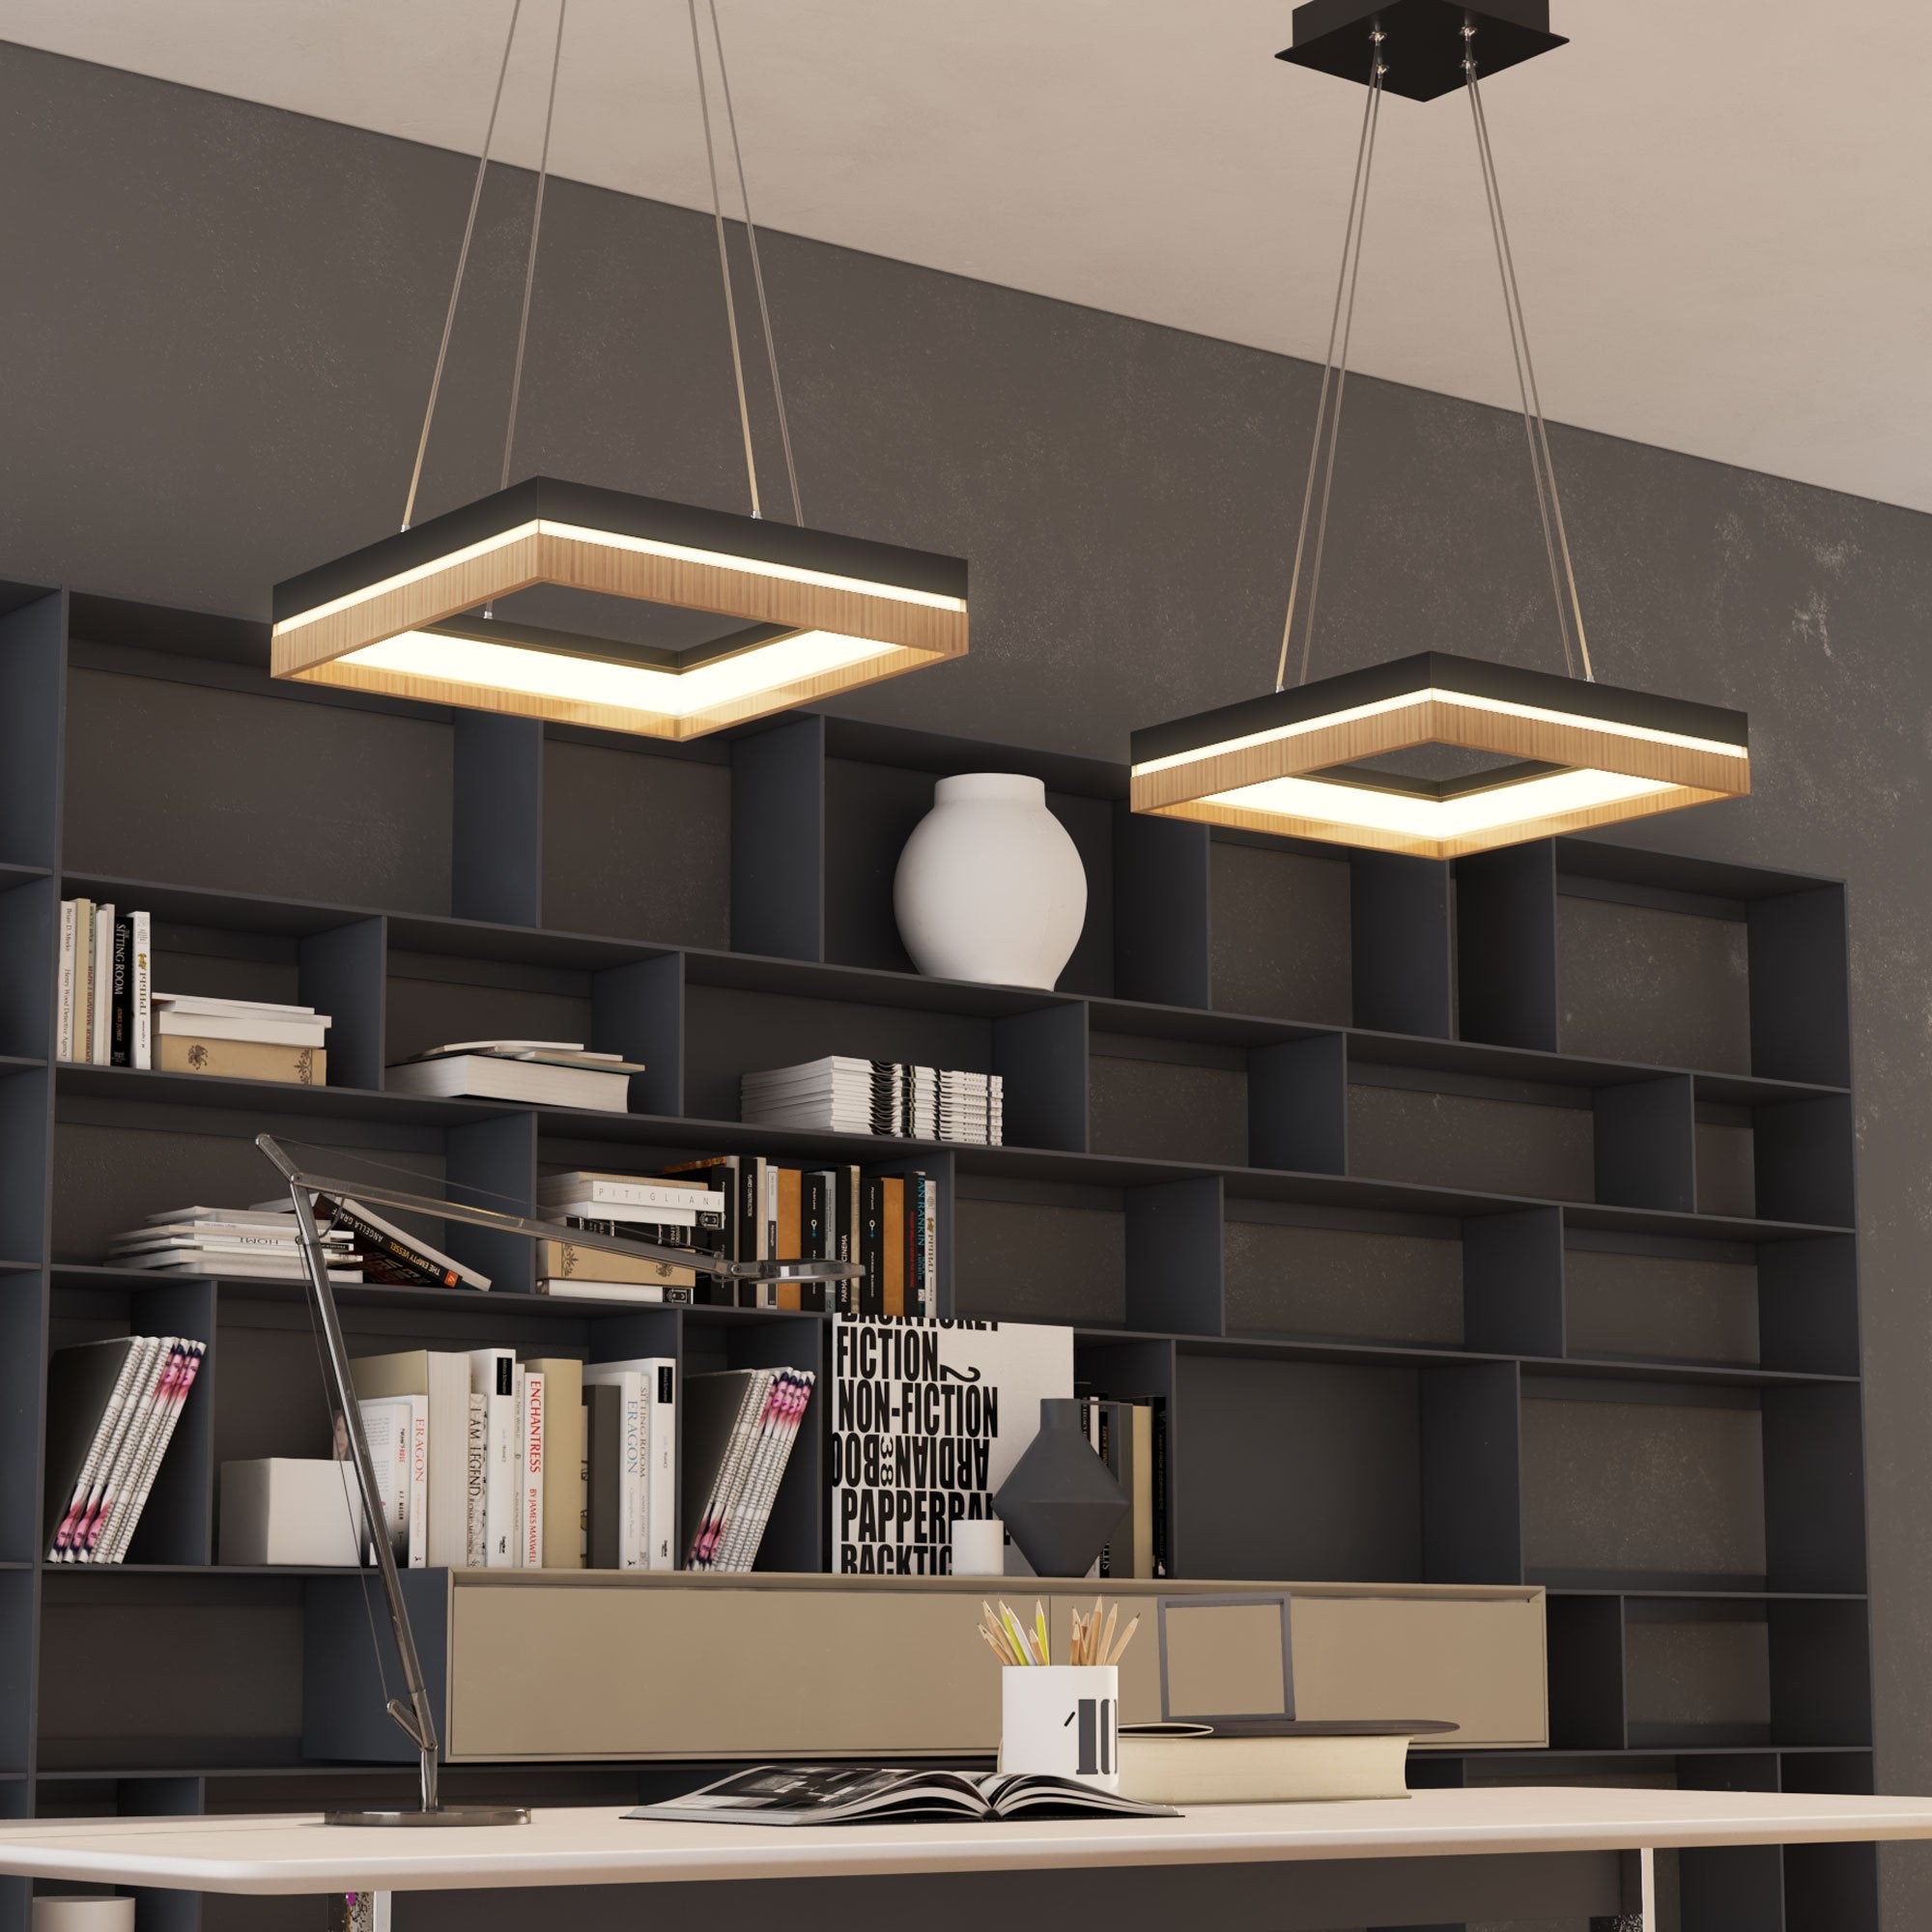 Square Metal and Wood Chandelier Light, 35W, 3000K (Warm White), 836 Lumens, Dimmable, Matte Black + Wood Body Finish